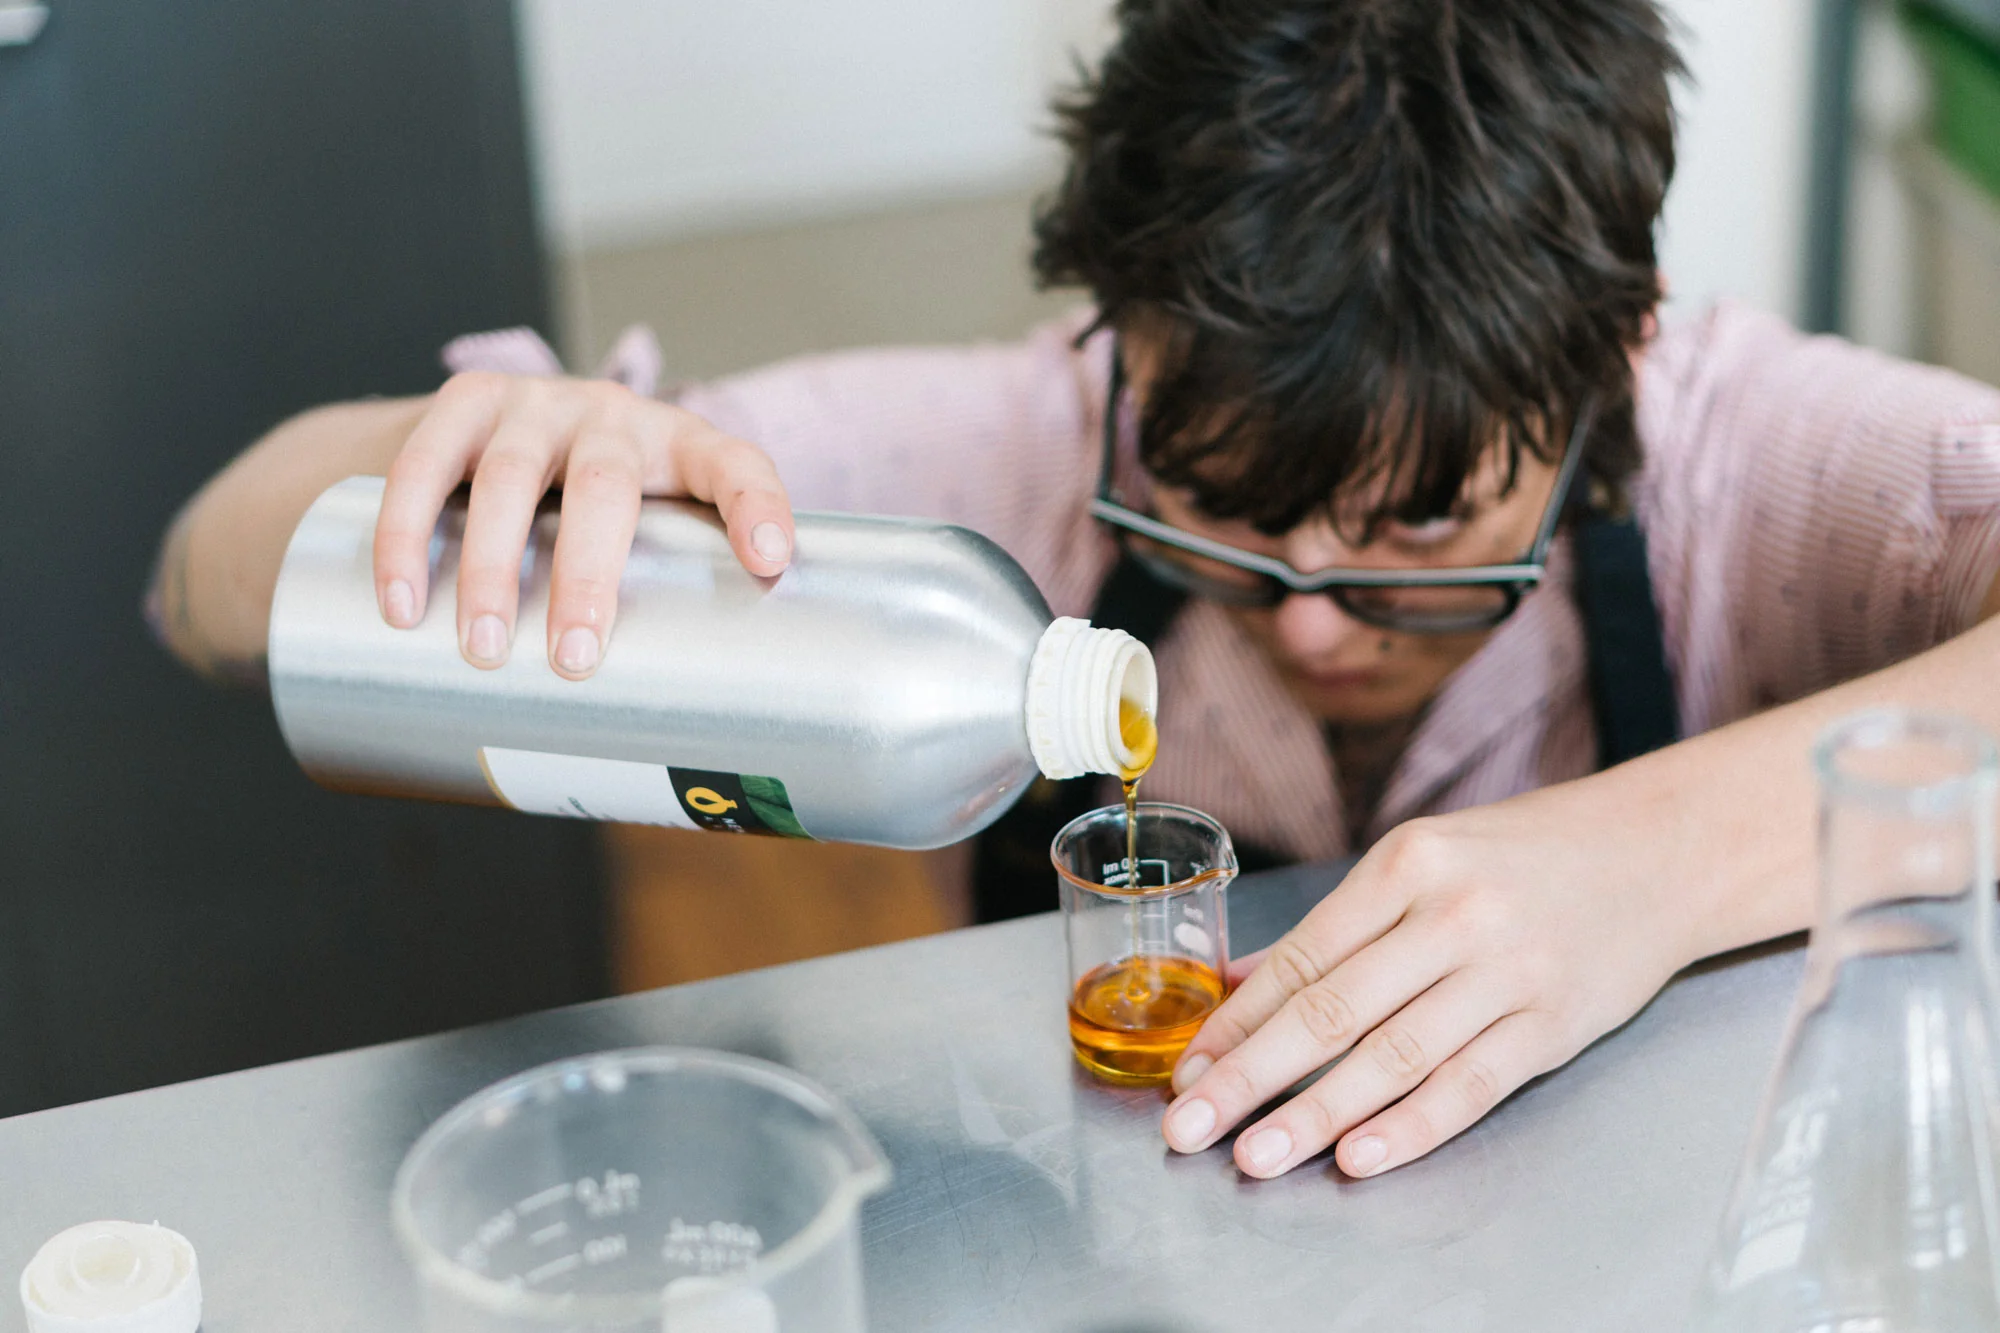  Photo of a Matter Company employee mixing liquid in a lab 